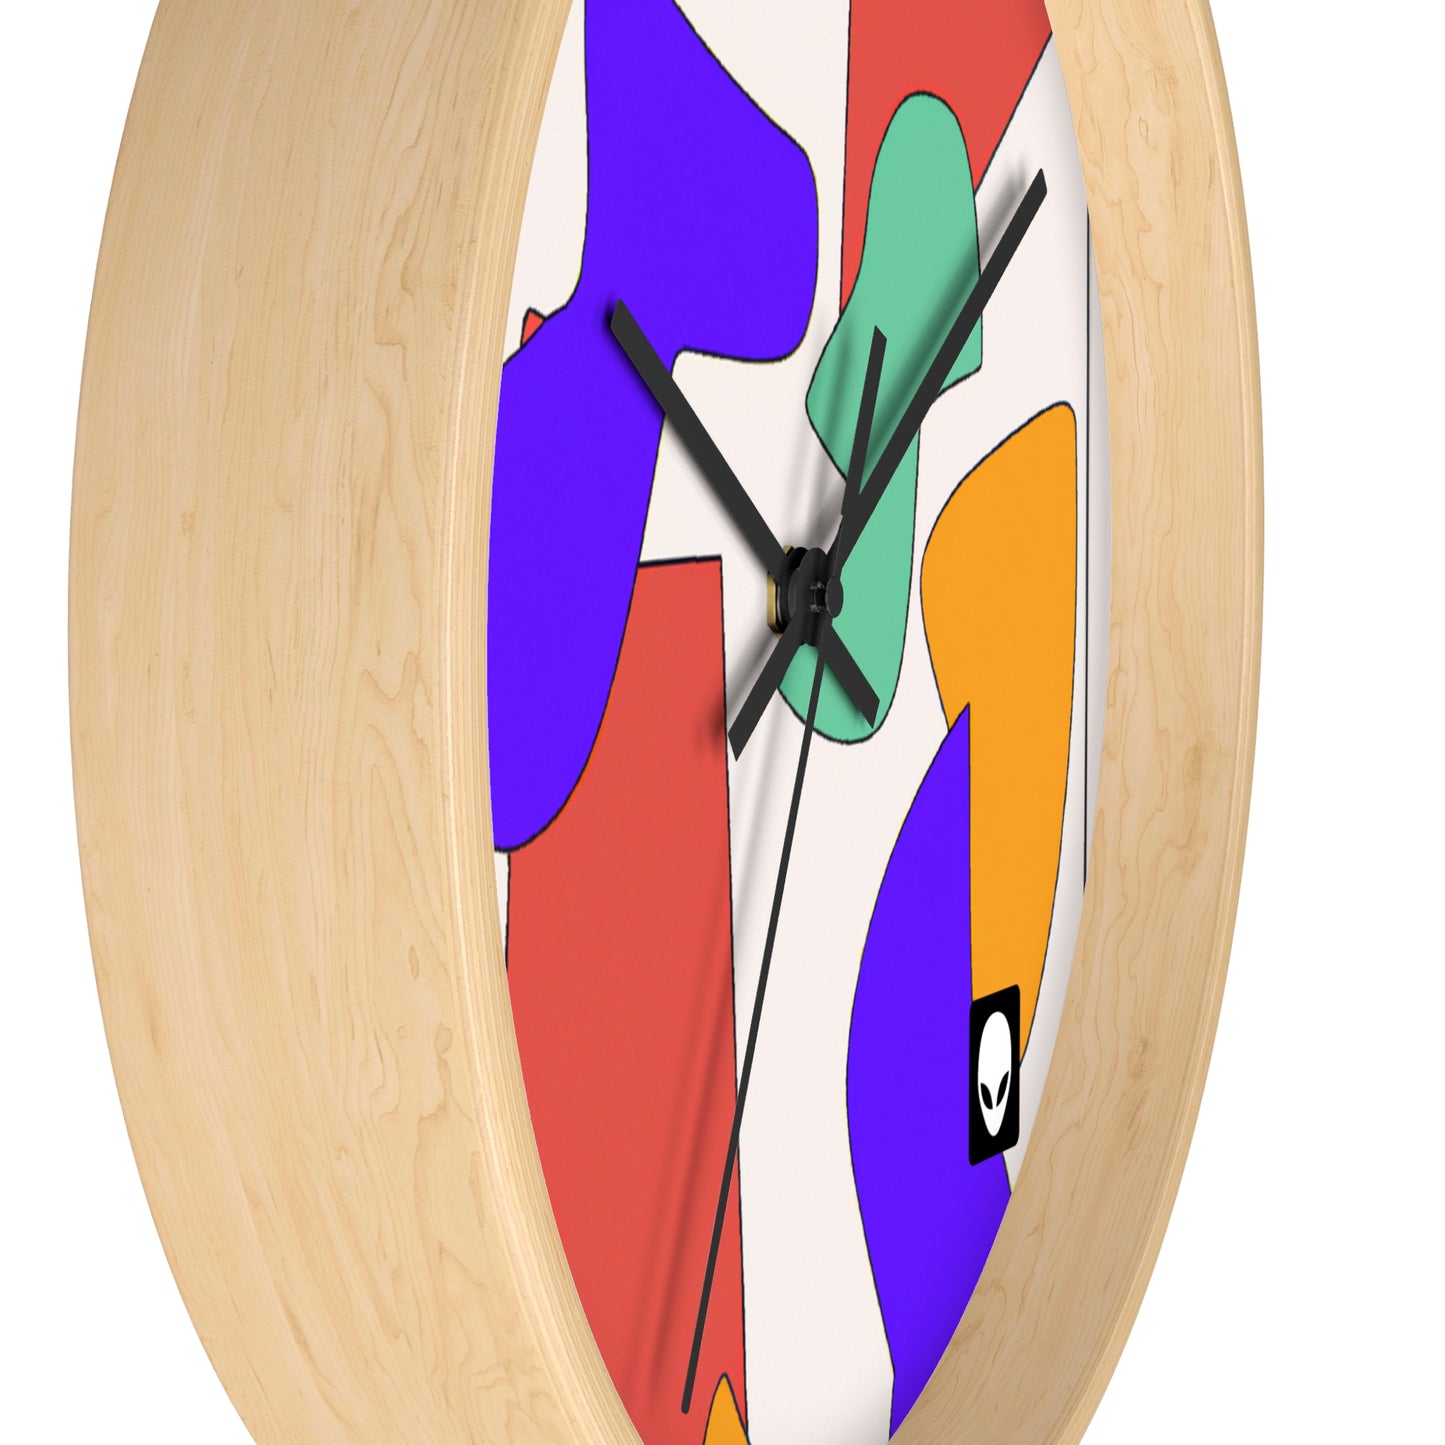 "A Beacon of Hope" - The Alien Wall Clock